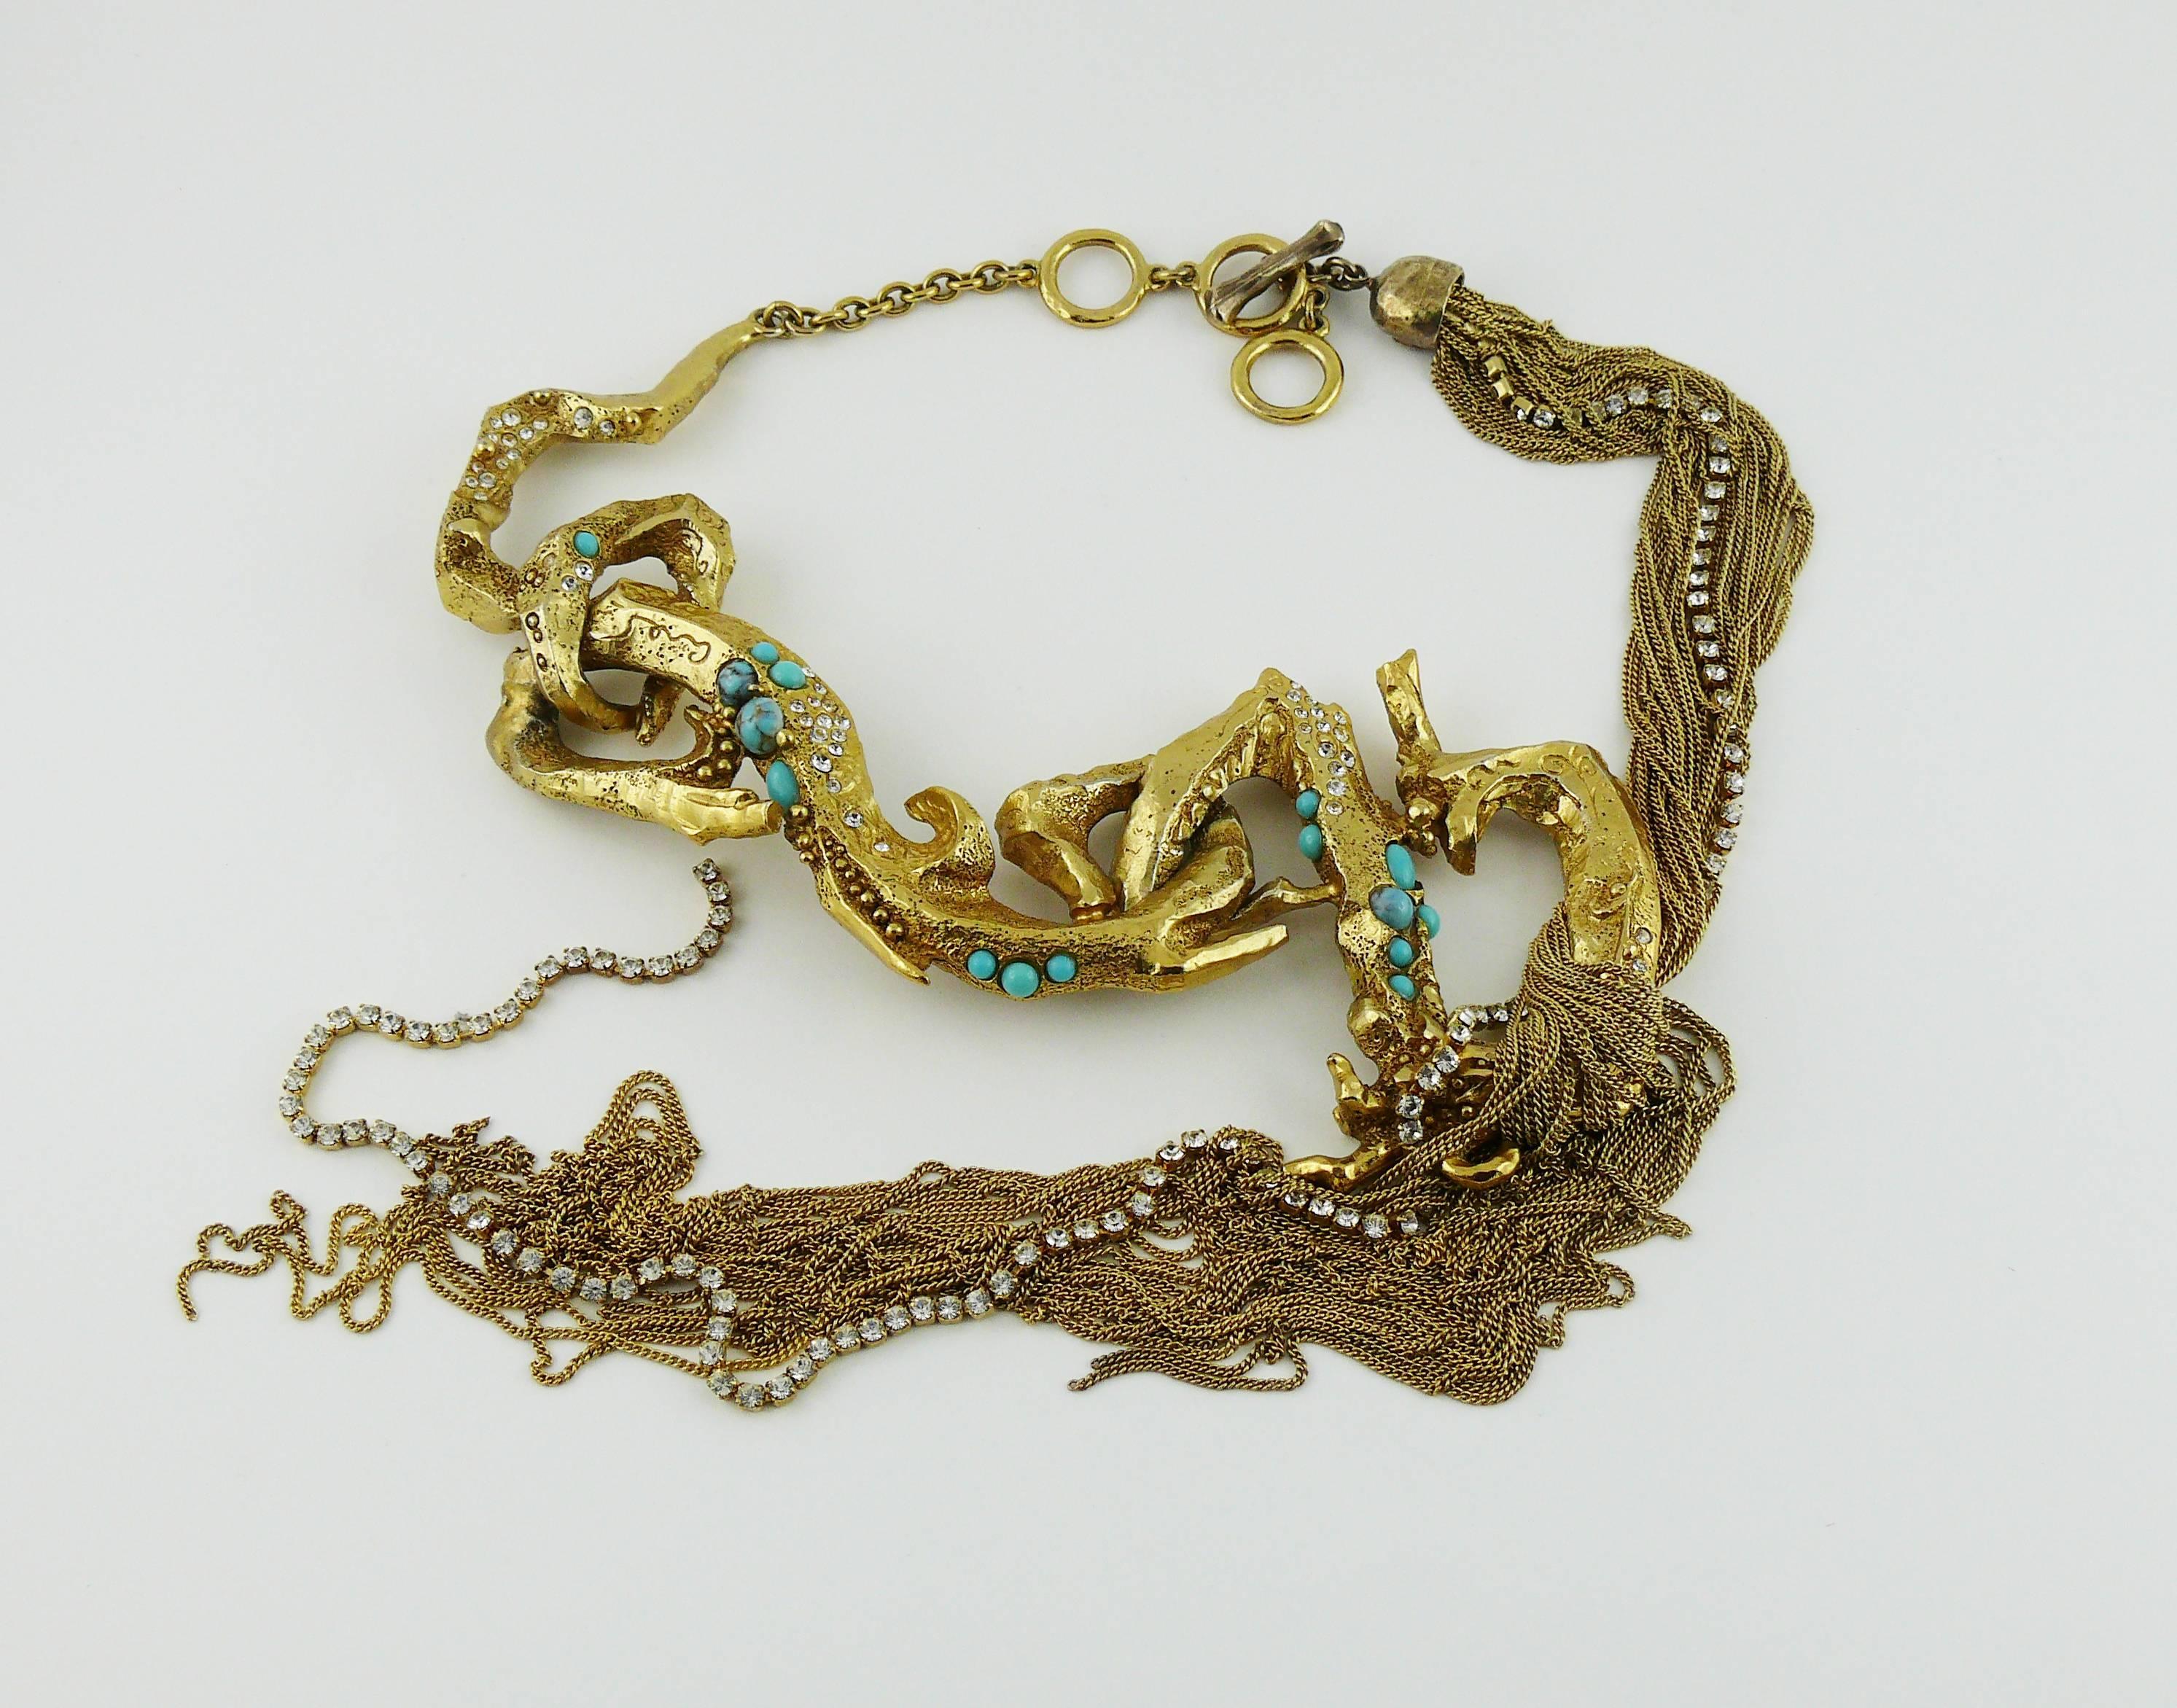 CHRISTIAN LACROIX vintage opulent runway necklace featuring gold toned textured intertwined branches embellished with faux turquoise cabochons and clear crystals. Extra long chain pendant.

T-bar closure.
Extension chain.

Marked CHRISTIAN